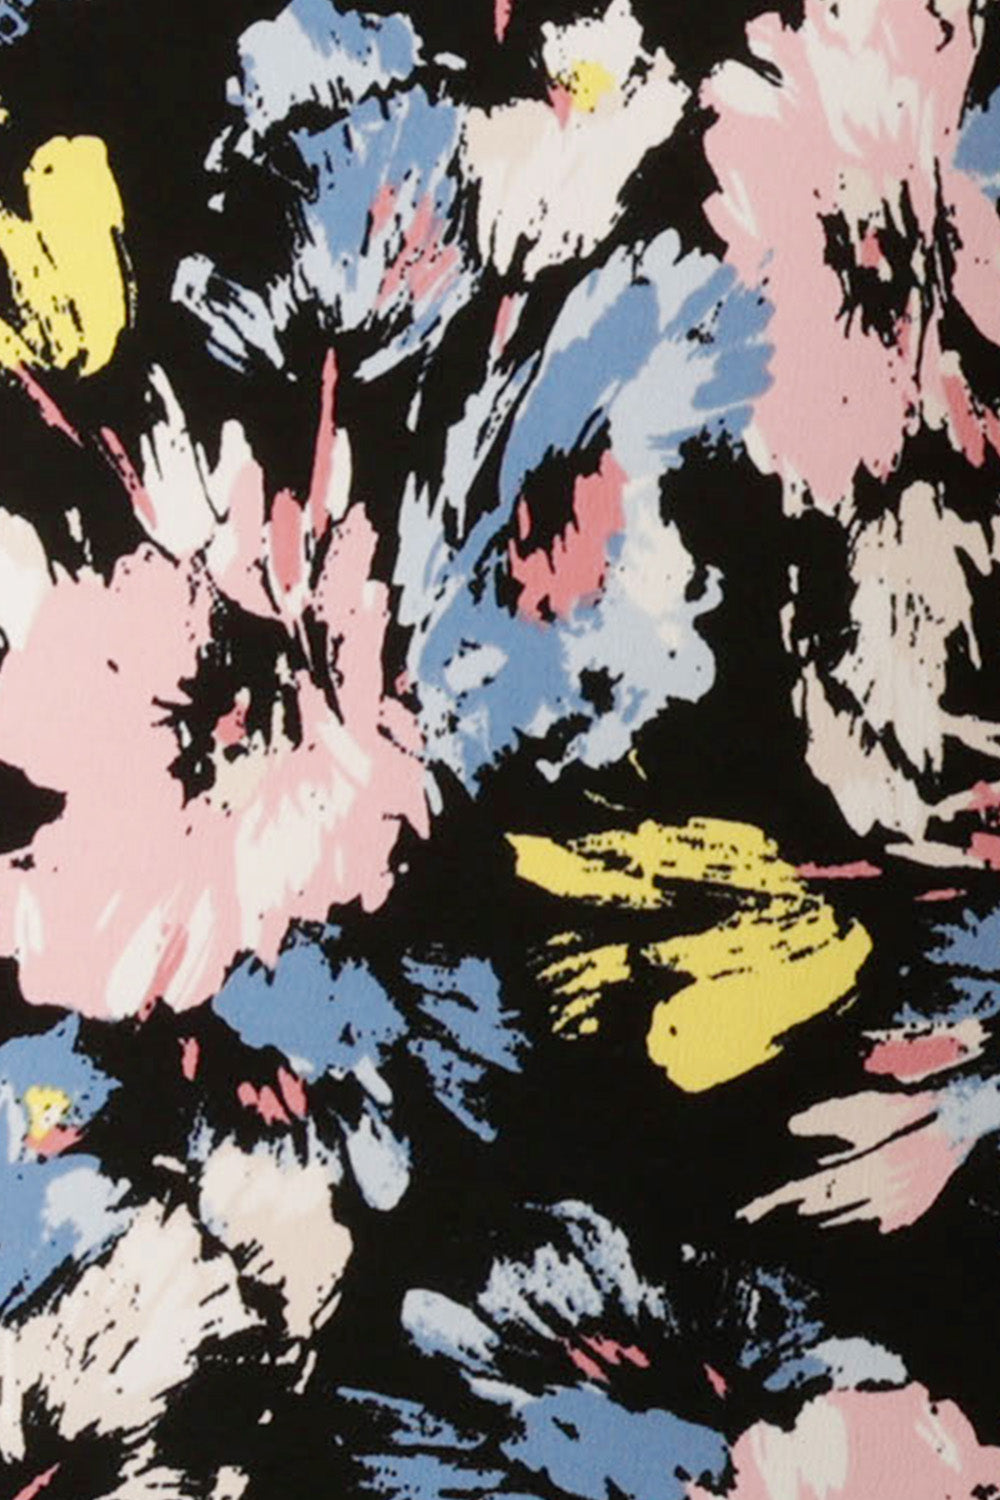 A swatch of a vintage-inspired floral print on jersey fabric used by Australian-made women's clothing brand L&F to make womens jersey dresses, tops and wide-leg pants for work and causal wear.